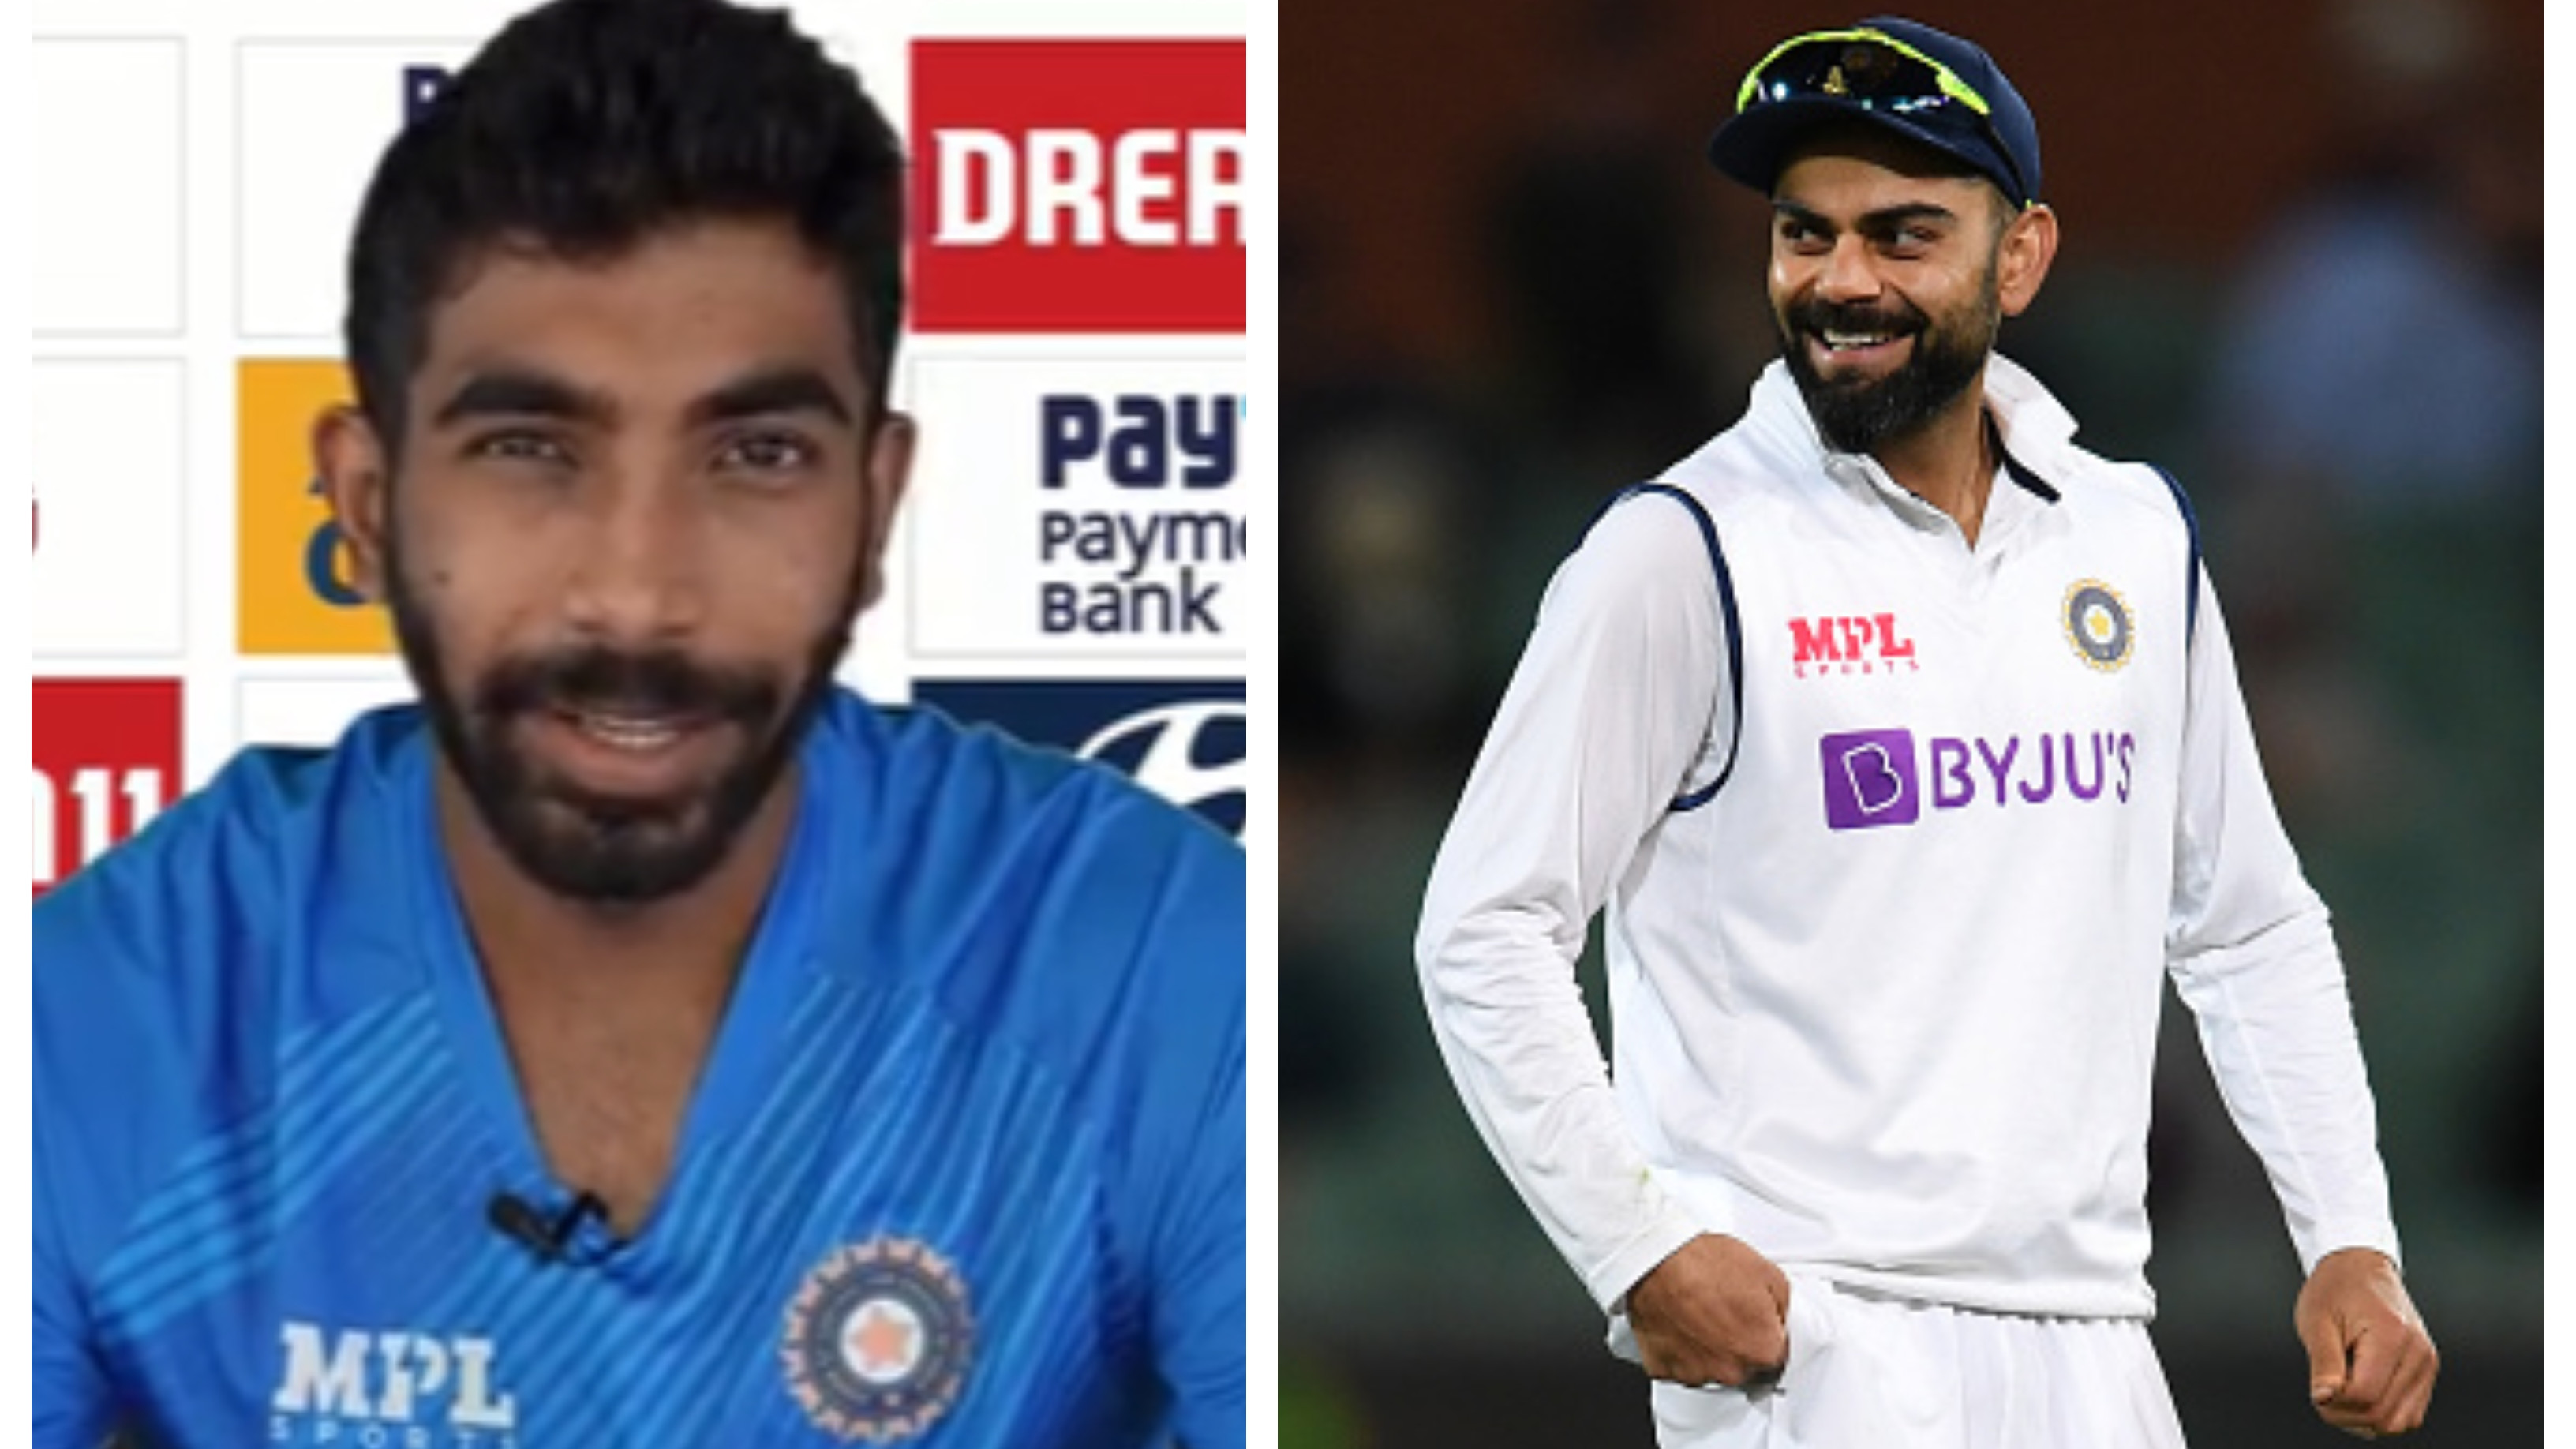 IND v SL 2022: WATCH - ‘It is a testimony to his hard-work, dedication’, Bumrah on Kohli’s 100th Test appearance